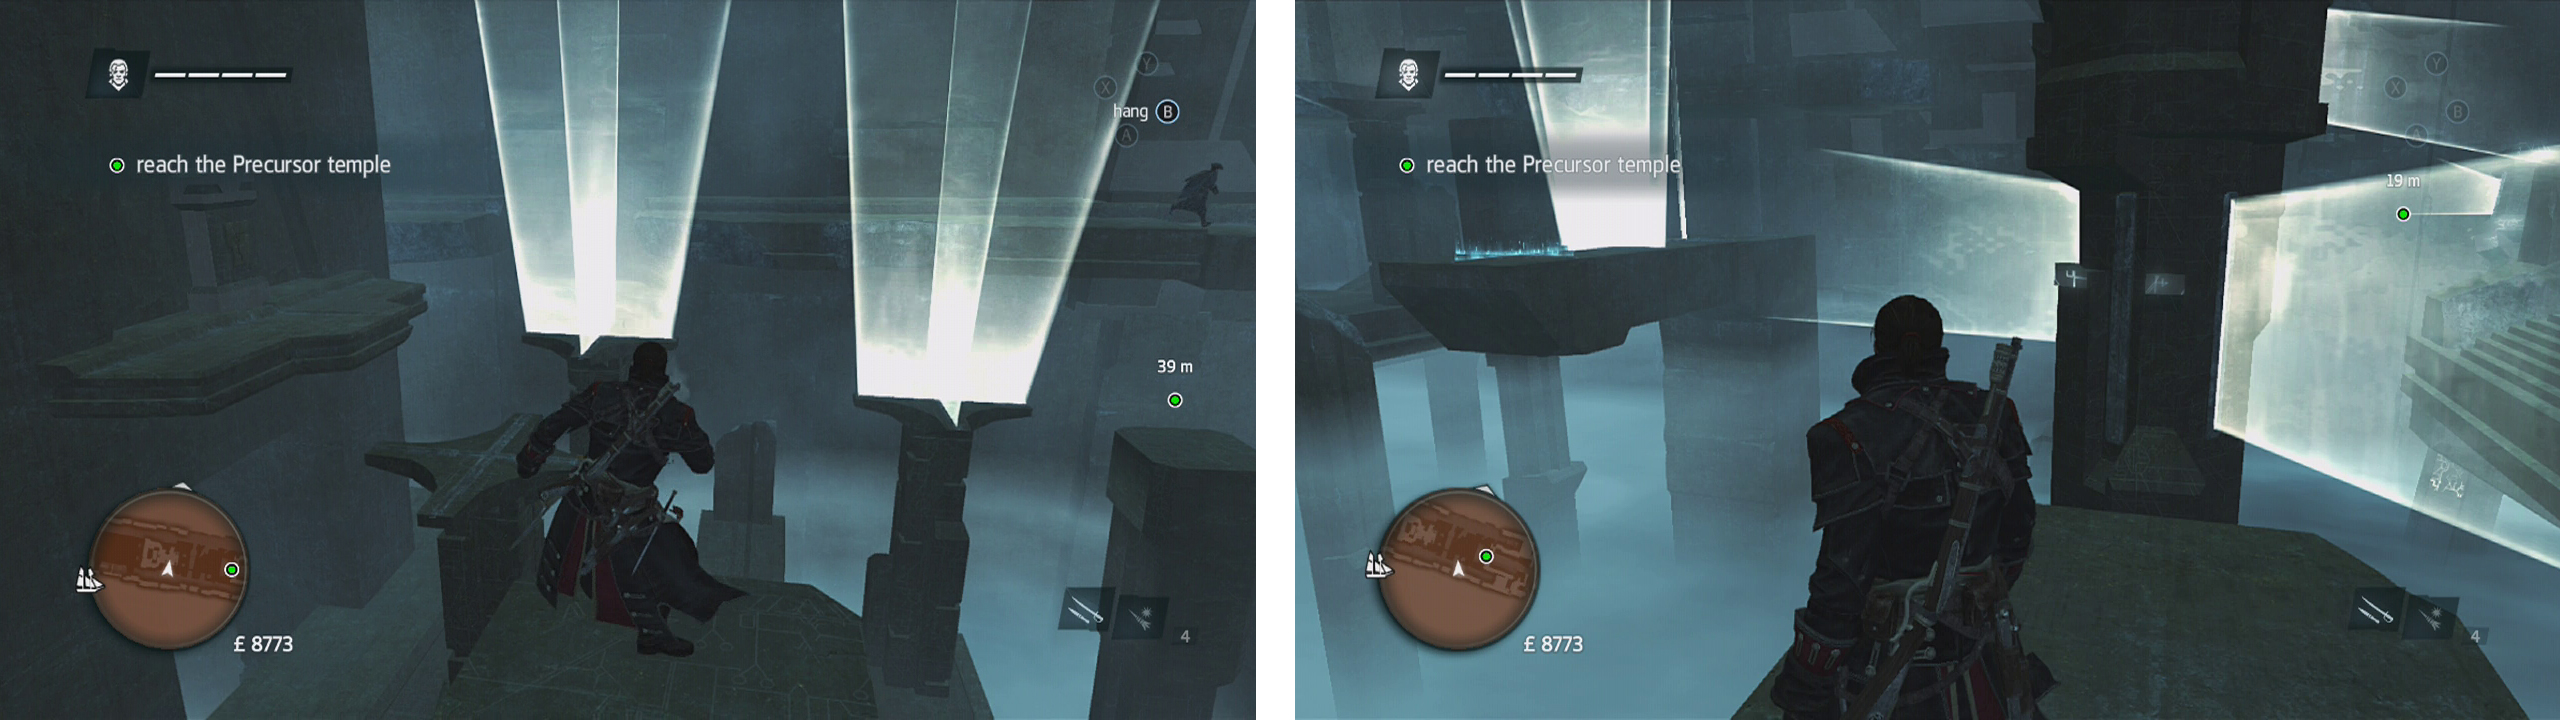 Work your way across the pillars (left) and up and around the hovering pole (right) whilst avoiding the energy walls.